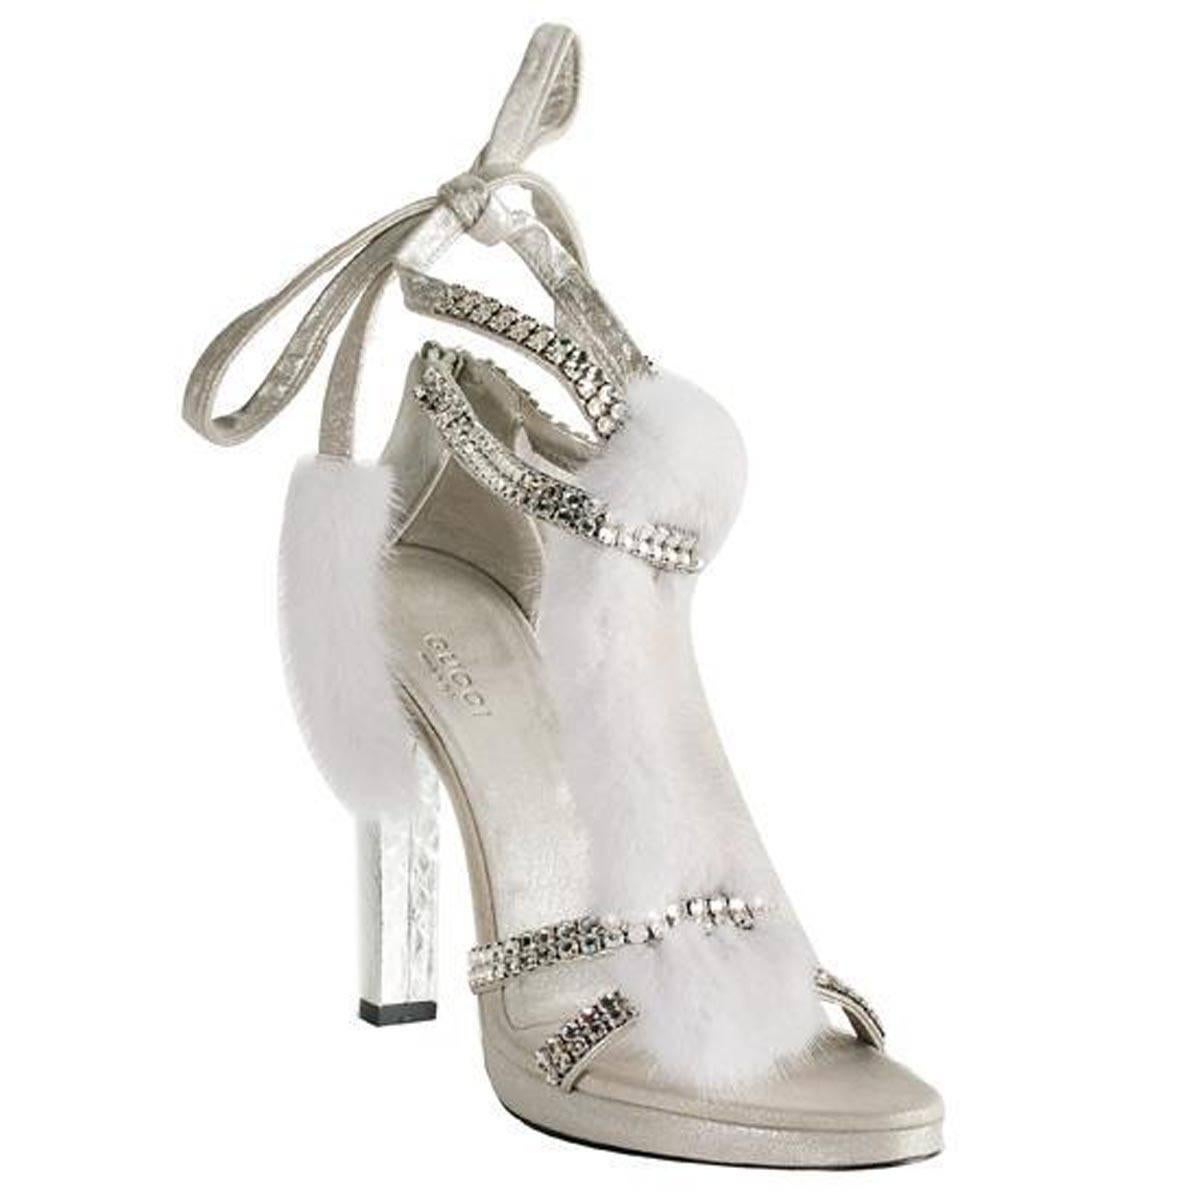 Tom Ford for Gucci Silver-Tone Fur Mink Sandals
F/W 2004 Collection
Italian size - 37.5 B (US - 7.5)
Swarovski Crystal Embellished Wrap Style Ankle Shoes
100% Real Mink
Silver- tone Snakeskin Heel - 4.5 inches
Leather Platform - 0.5 inches
Made in